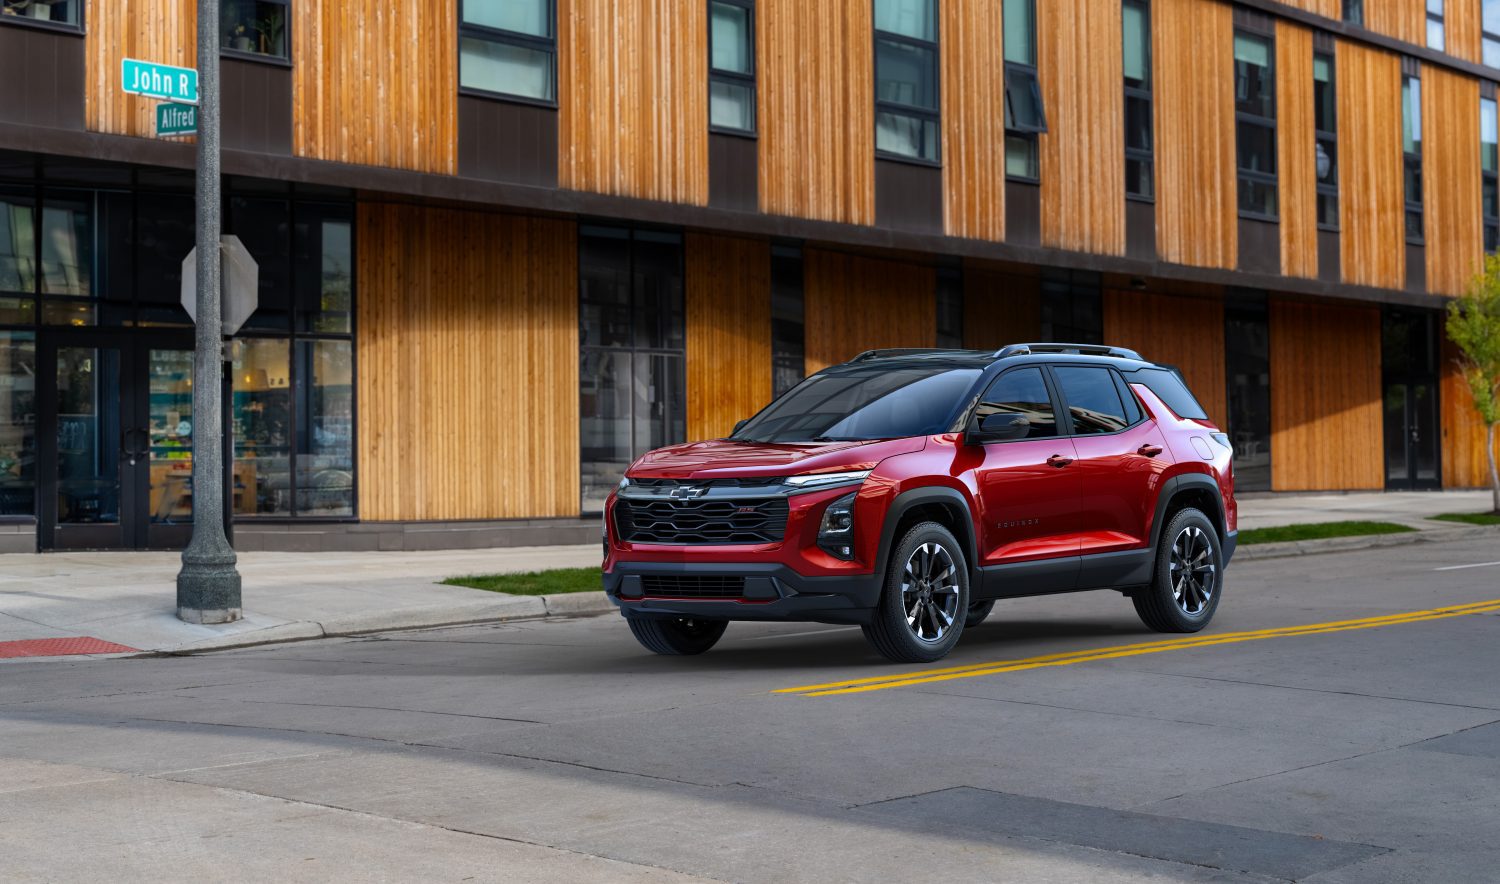 General Motors has revealed a modernized Chevrolet Equinox SUV with more external customization options and a re-vamped interior.